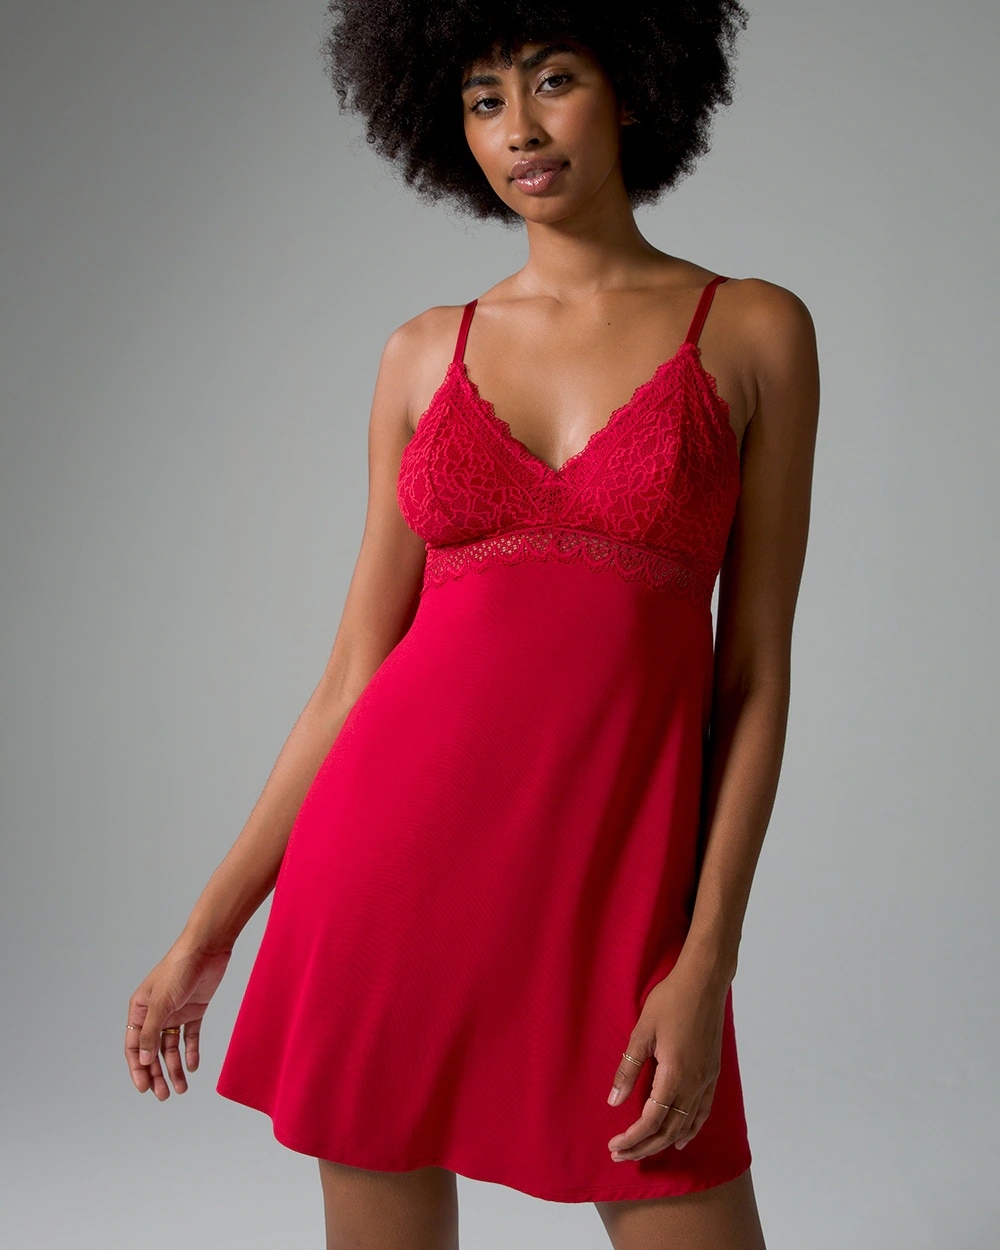 Soma<sup class=st-superscript>®</sup> women’s model wearing red chemise with lace bust.